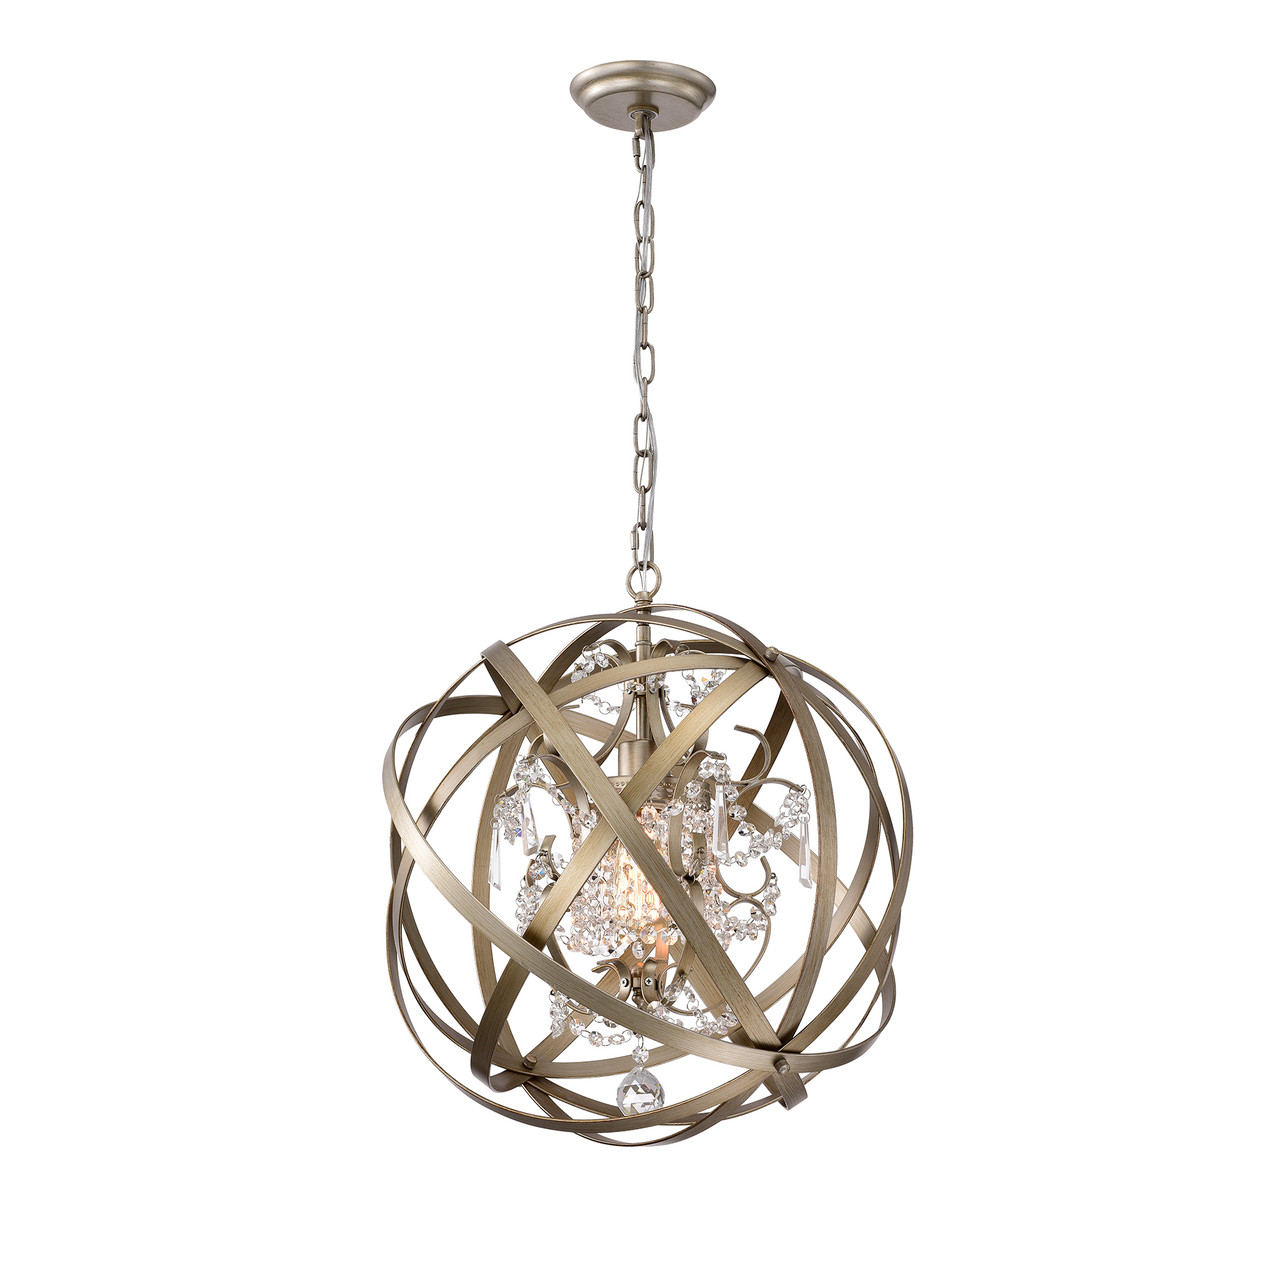 WAREHOUSE OF TIFFANY'S HM234/1SG Kenny 19 in. 1-Light Indoor Silver Gray Finish Chandelier with Light Kit